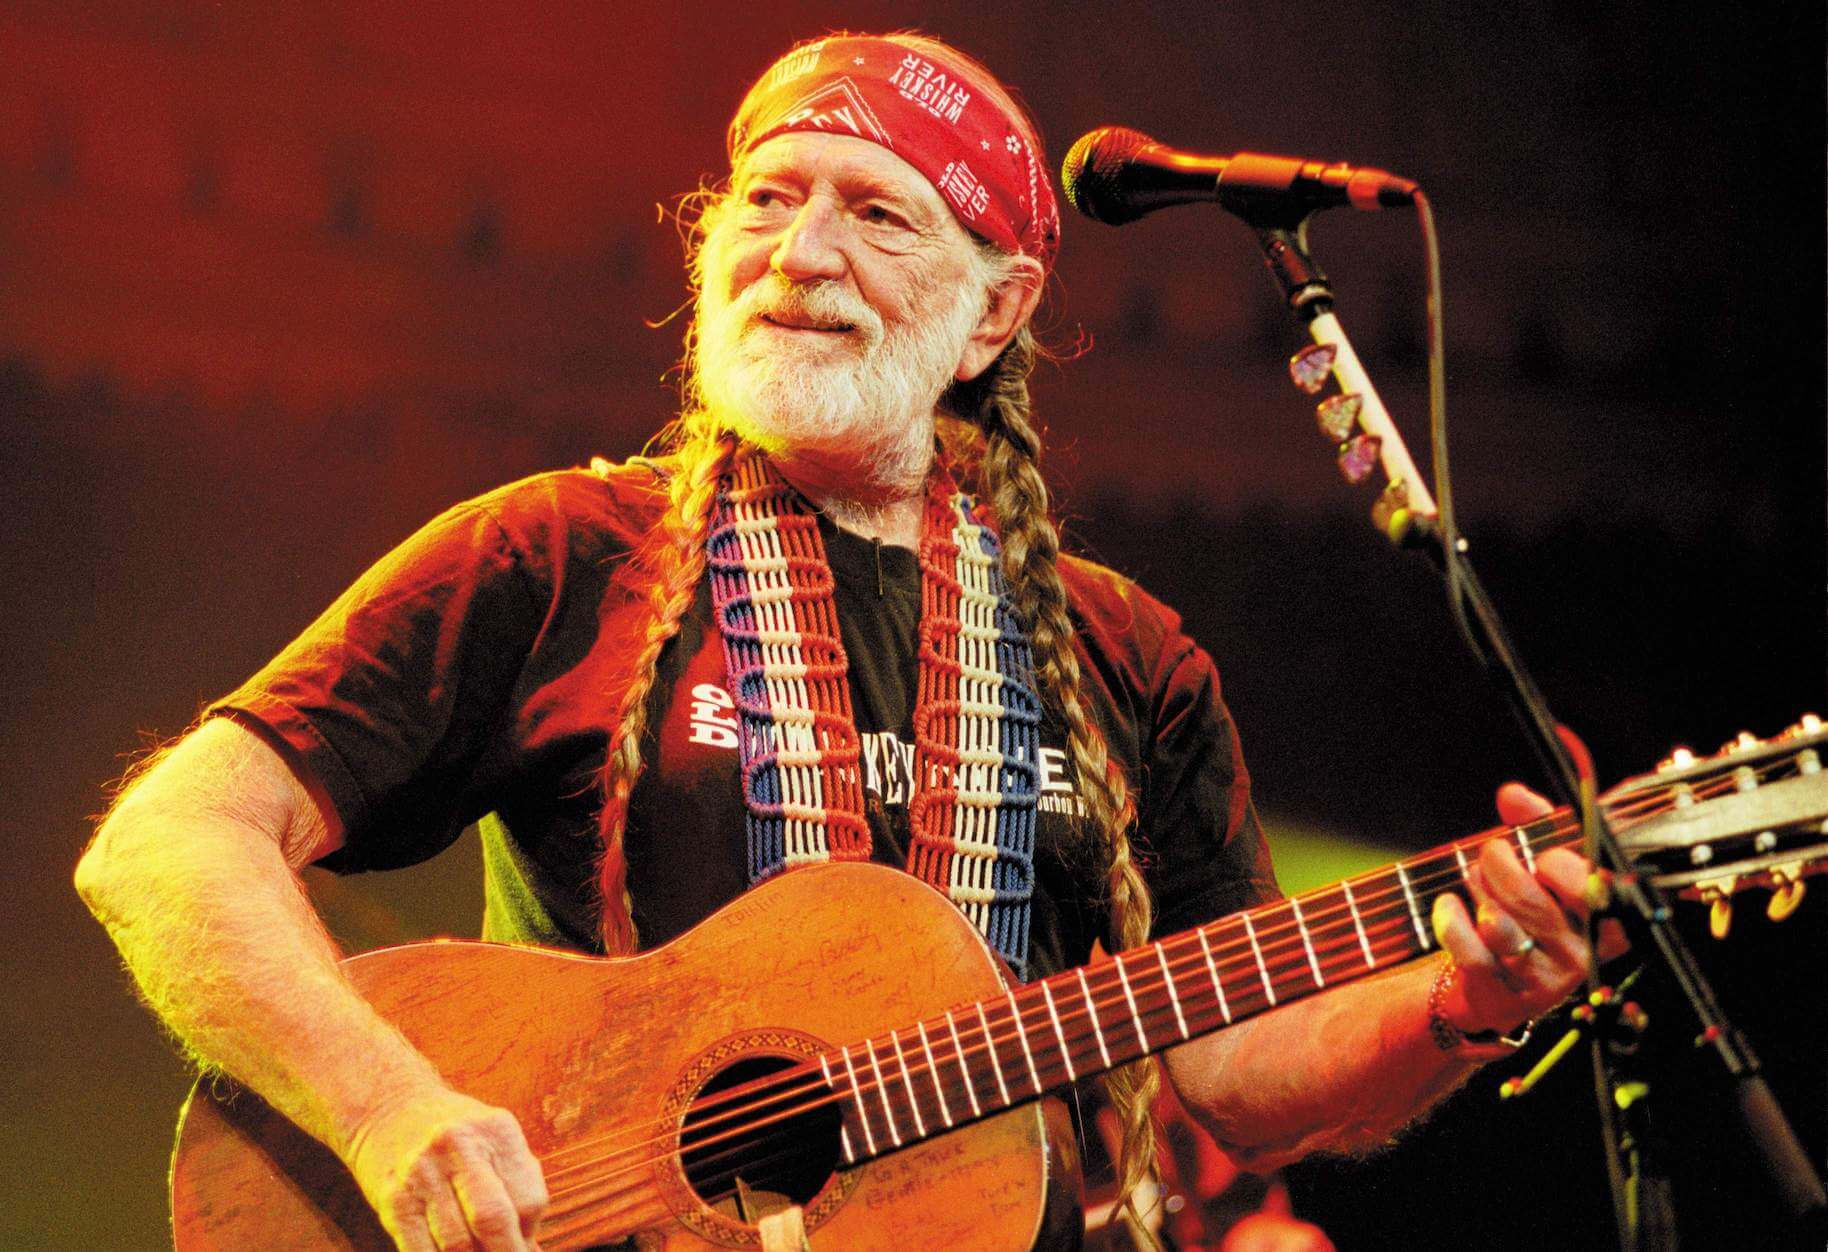 Willie Nelson on stage with a guitar